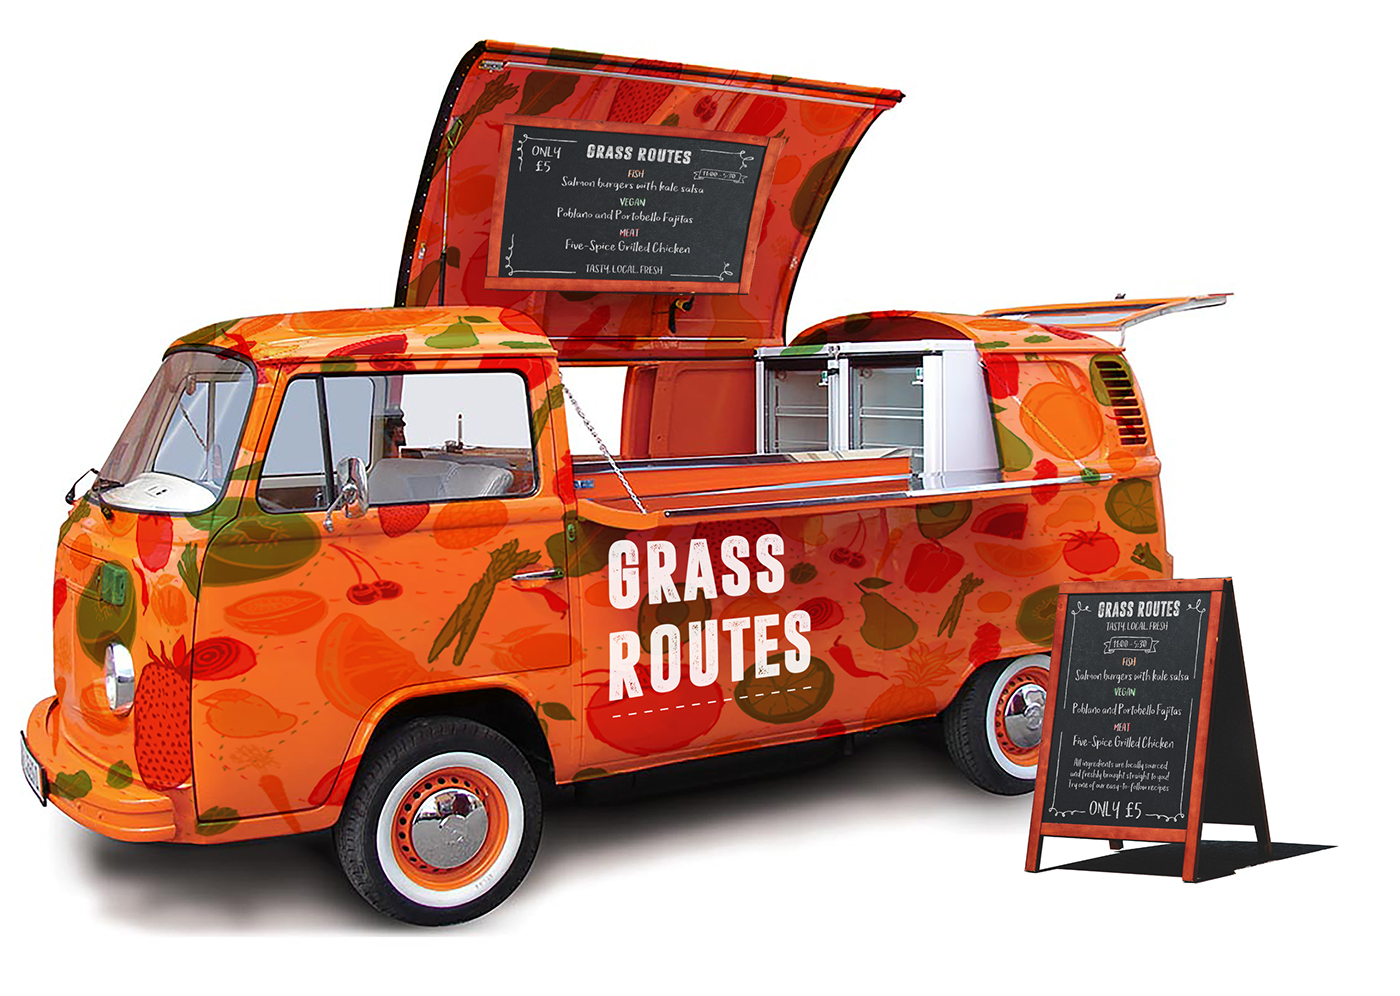 branding  graphic design  ILLUSTRATION  Advertising  copywriting  Colourful  Food truck healthy eating meals local businesses